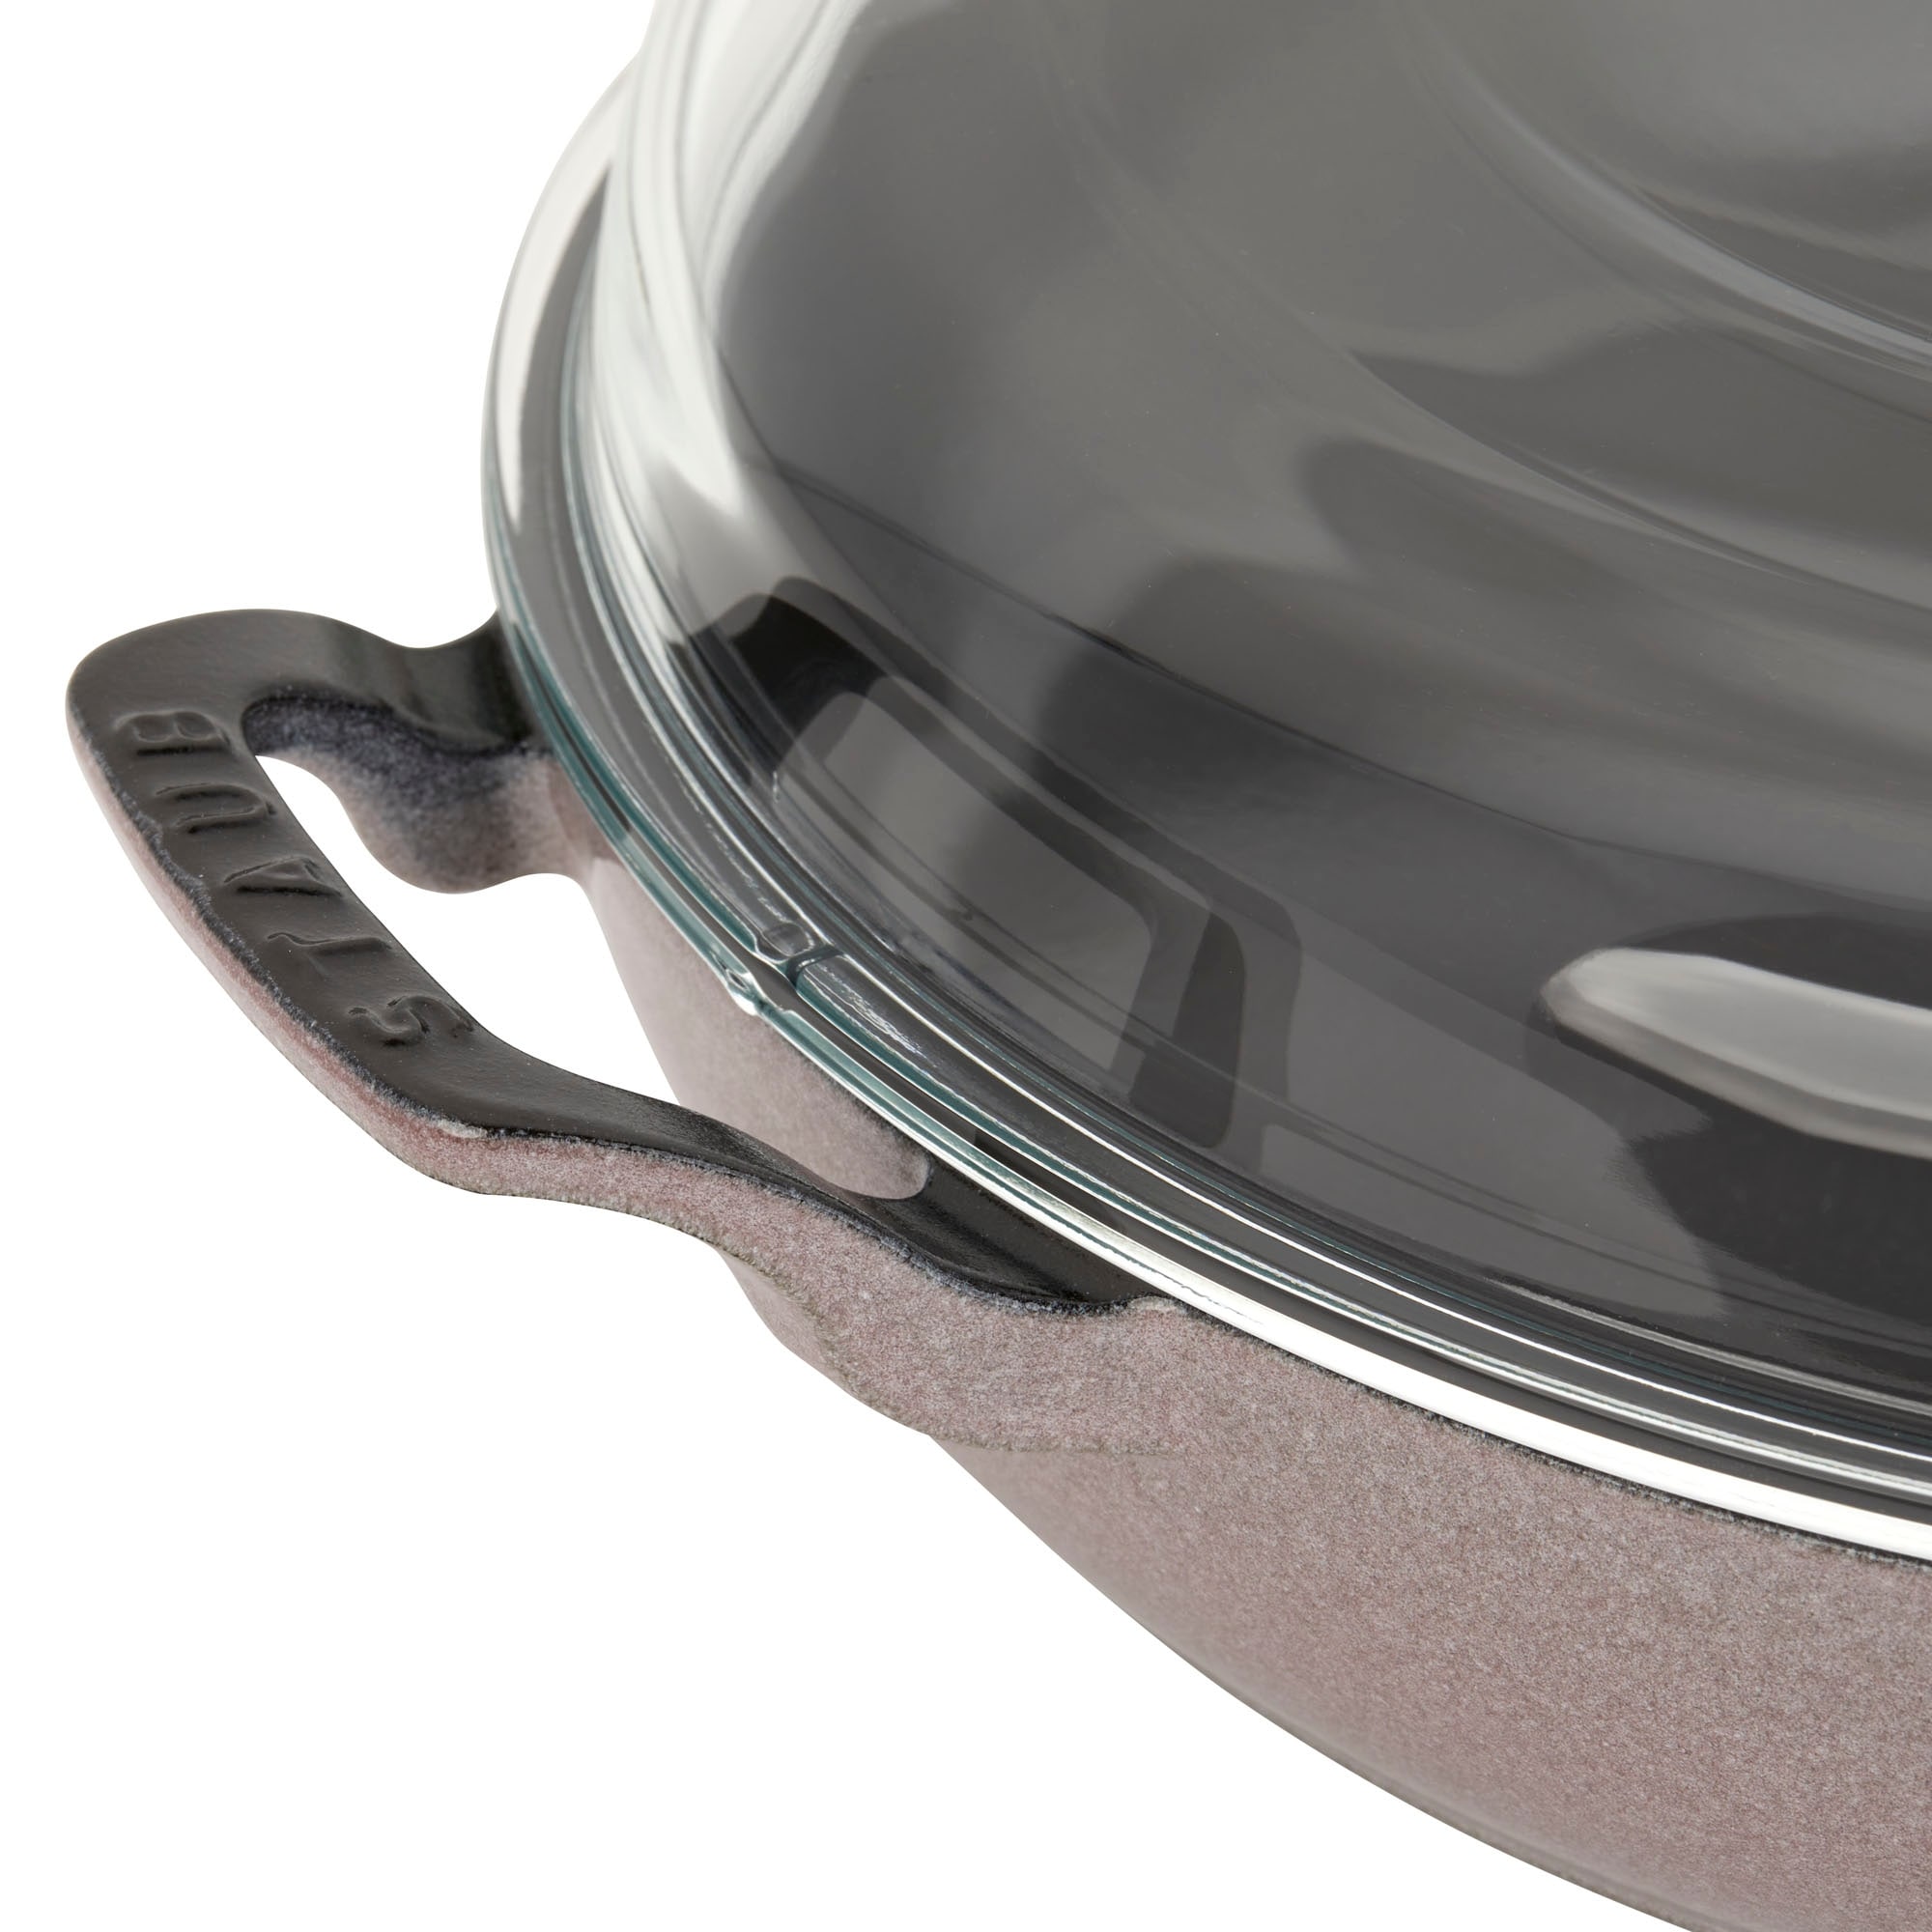 https://ak1.ostkcdn.com/images/products/is/images/direct/18c0a72b6e29a3741a50128a85cc41fe8587ebd5/STAUB-Cast-Iron-3.5-qt-Braiser-with-Glass-Lid.jpg